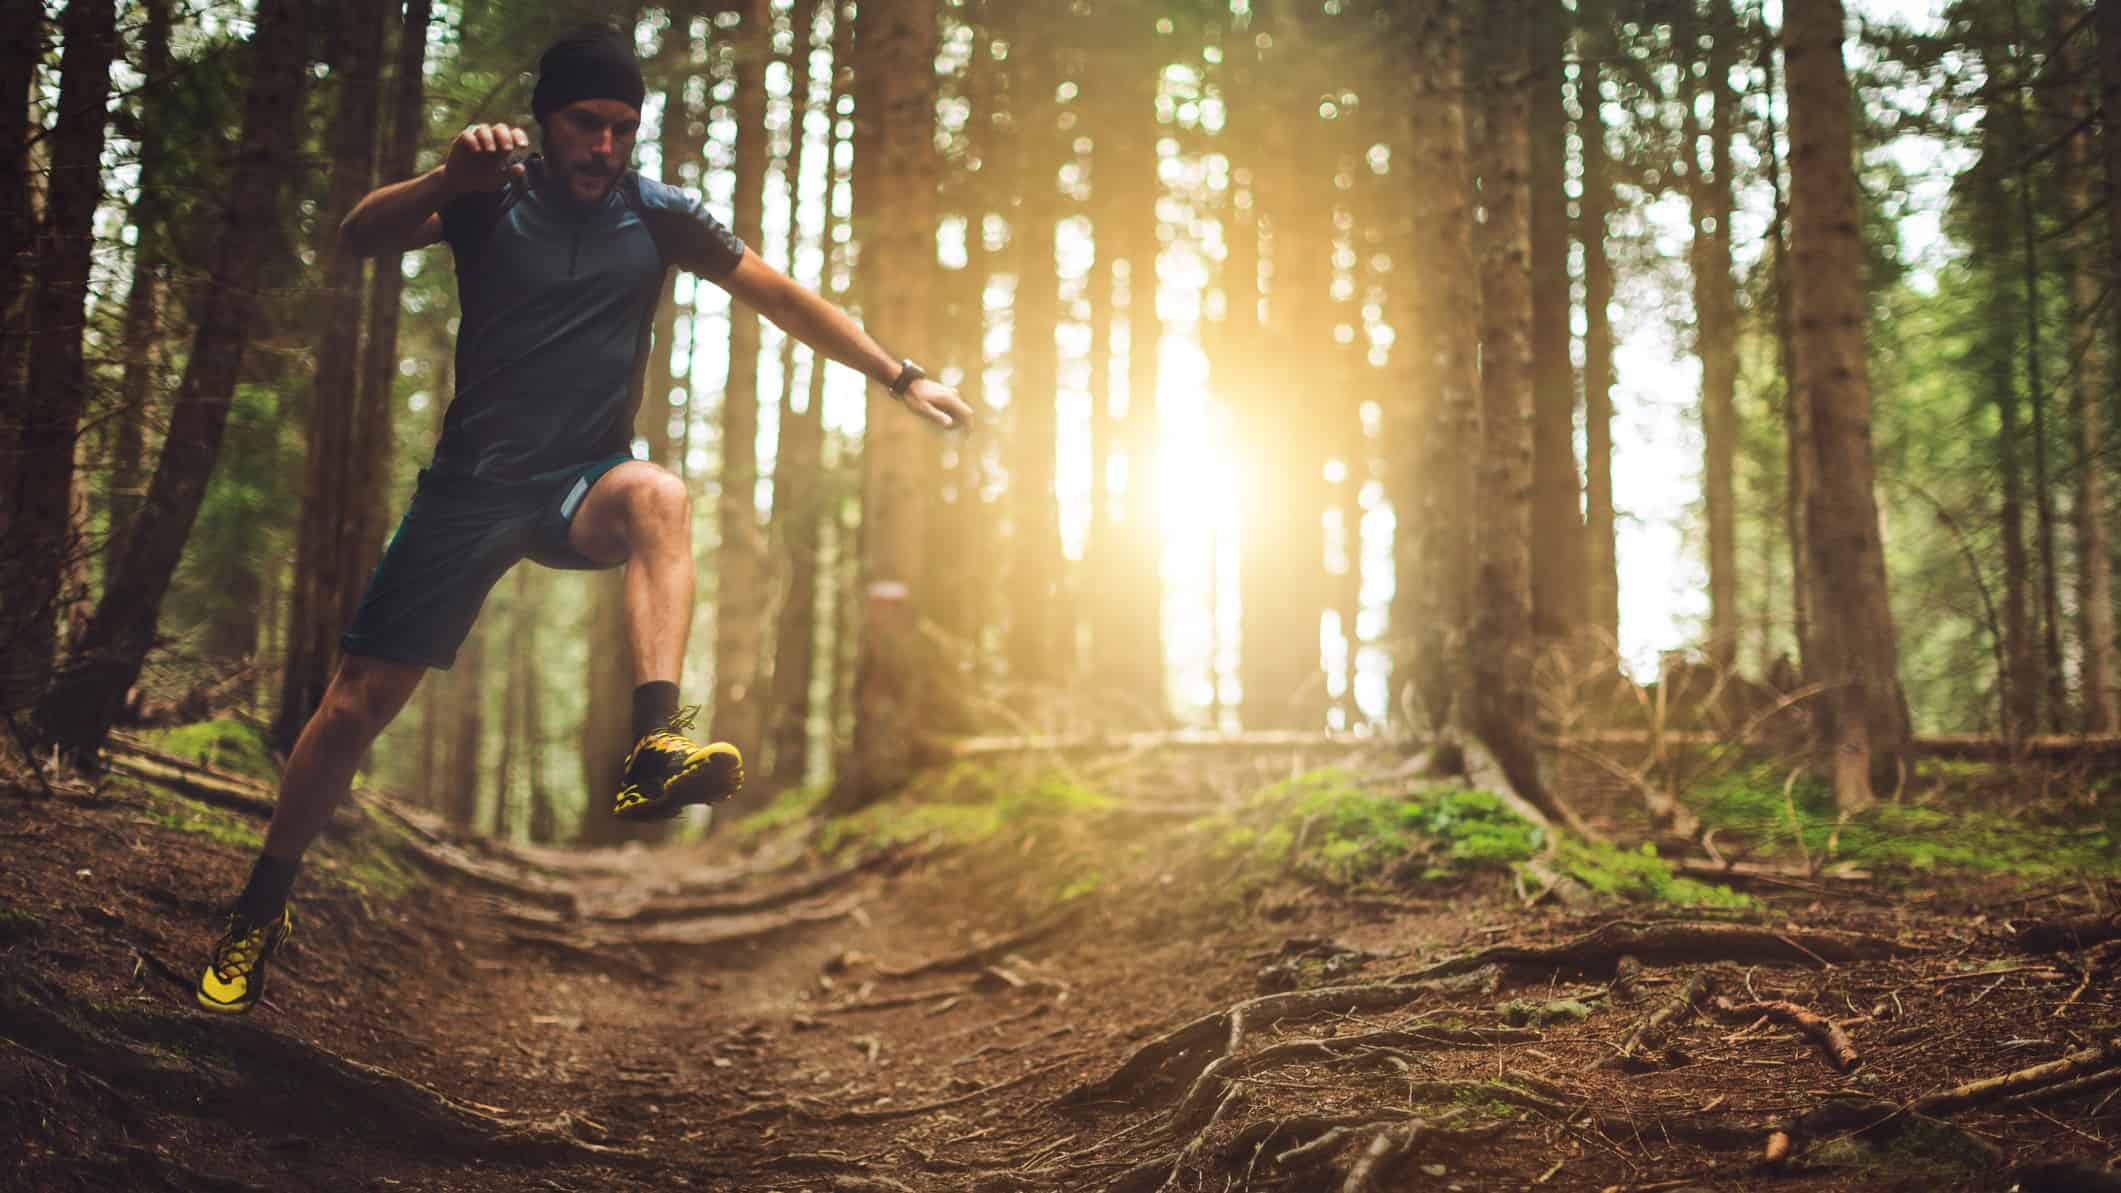 A male runner is in an awkward pose as he approaches an uneven part of a running track through a forest with tall trees and sunlight shining through them.